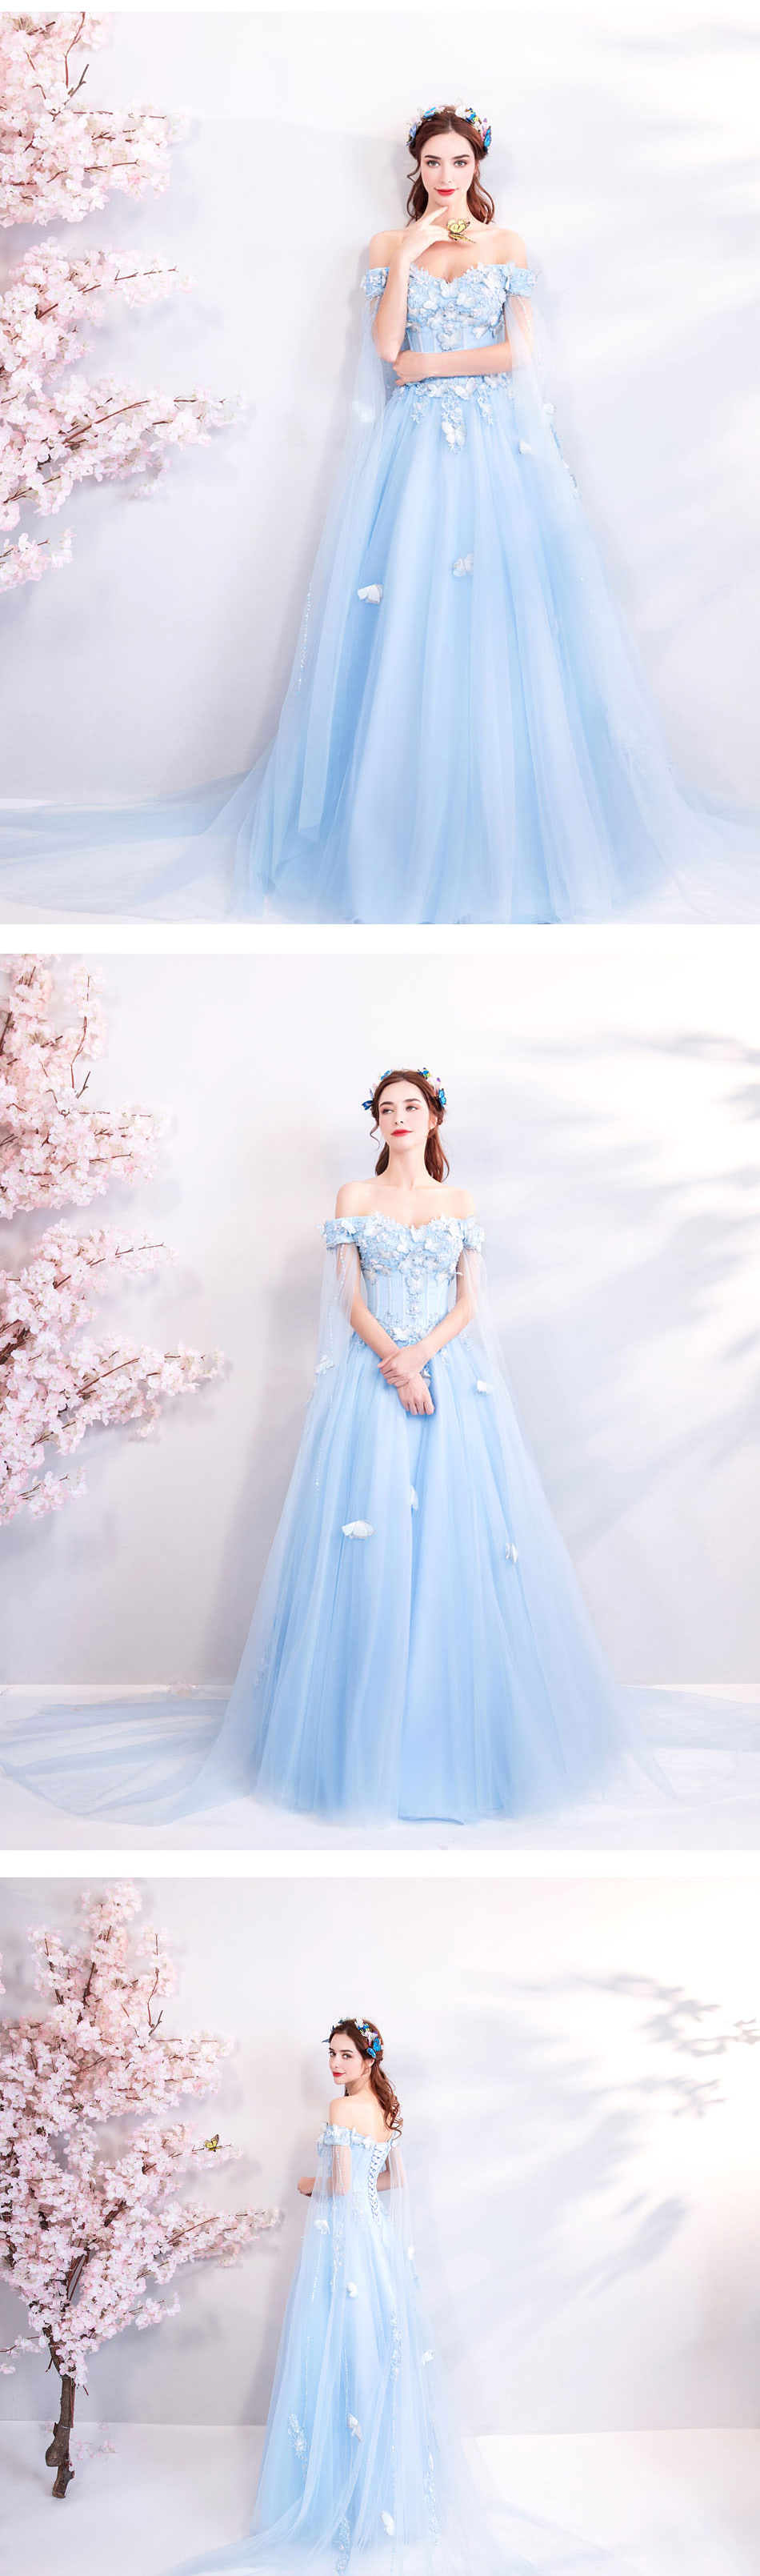 Beautiful-Lace-Blue-Tulle-Evening-Formal-Long-Dress-with-Butterfly10.jpg